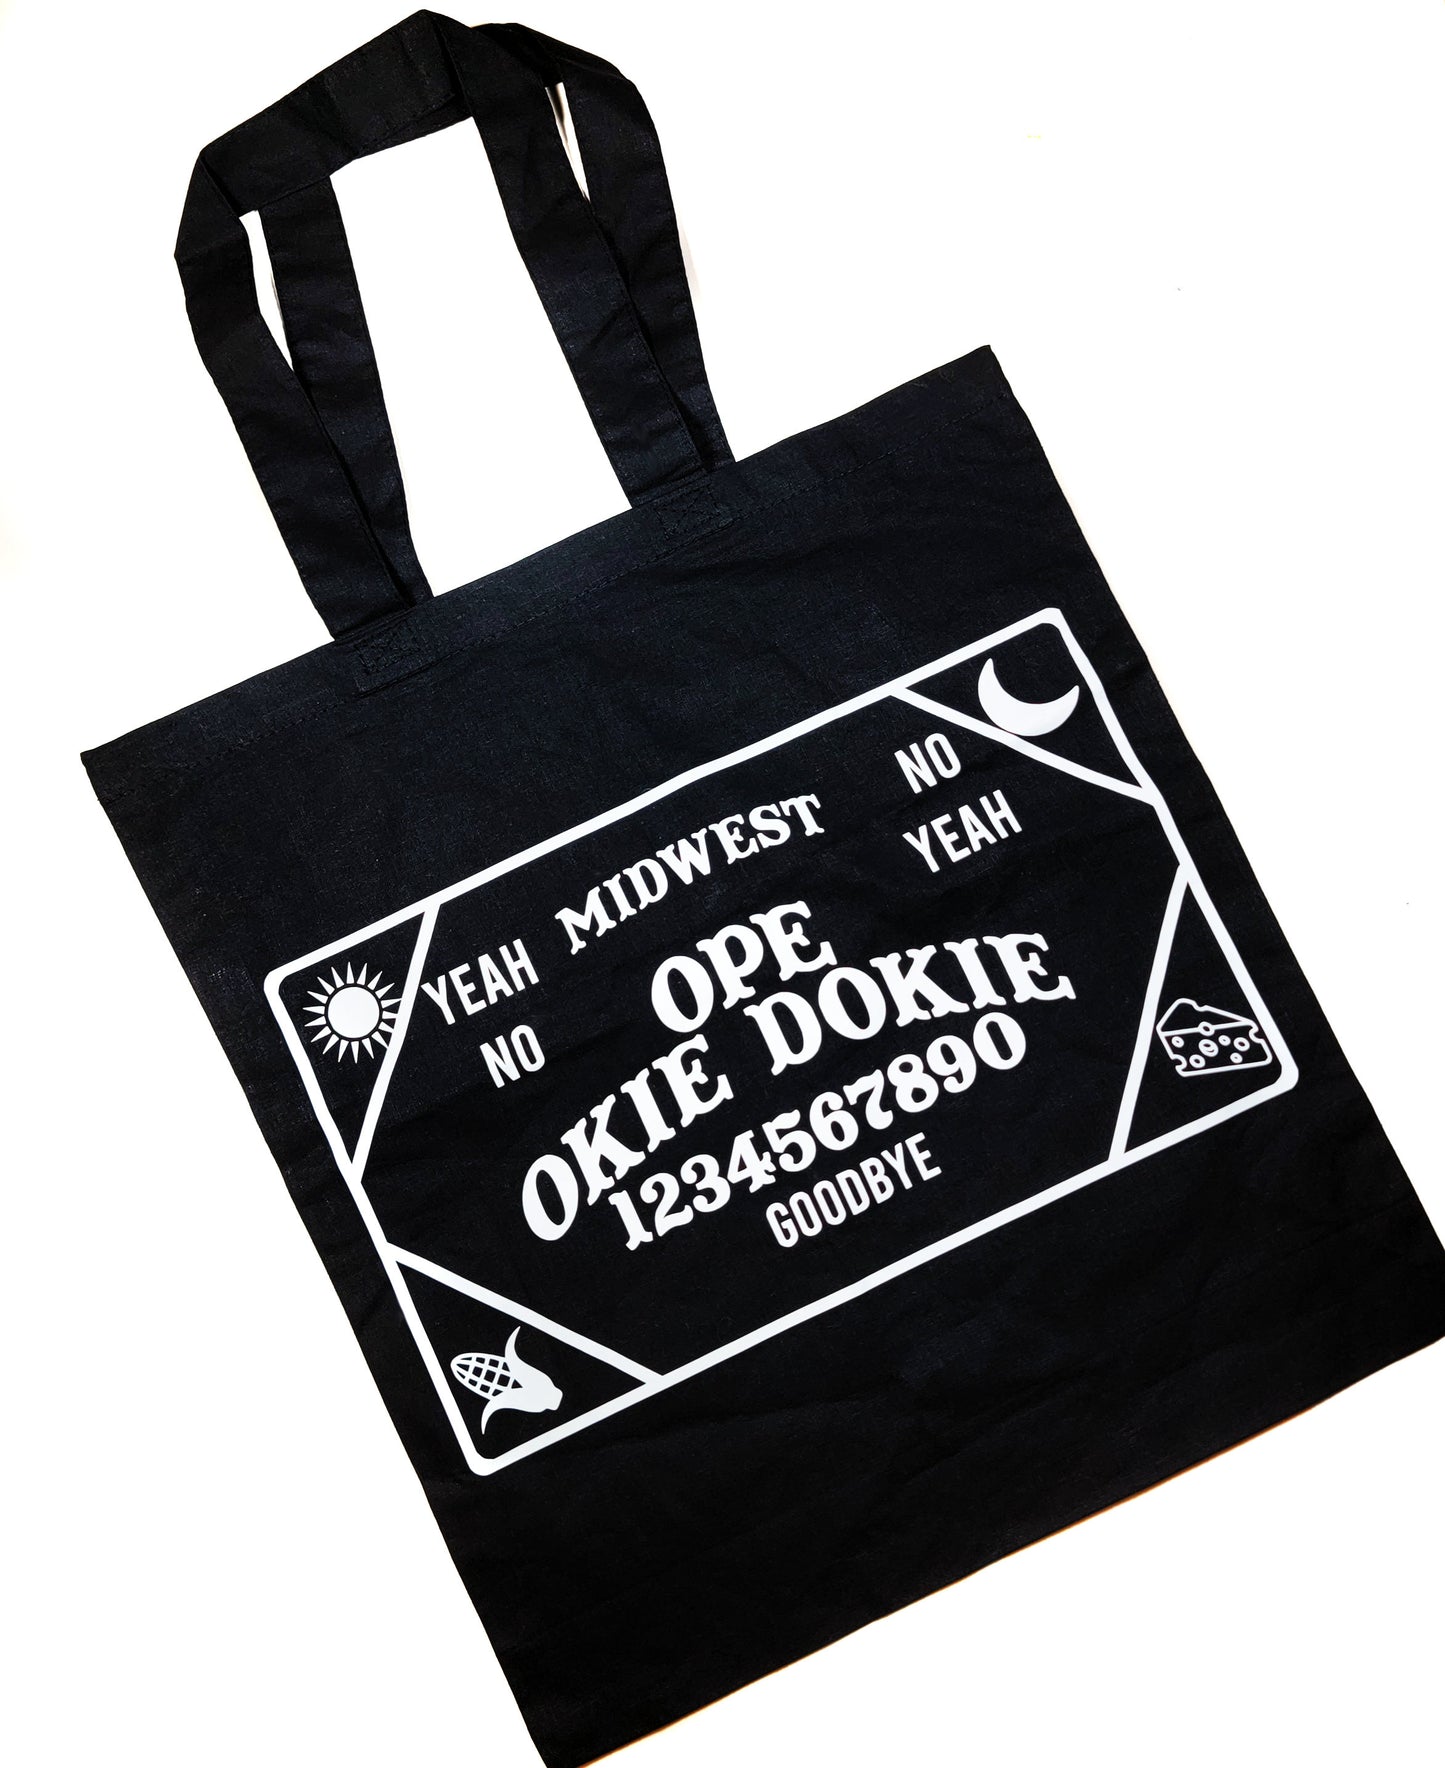 Midwest Ouija Tote Bag Black Cotton Reusable Shopping Bag 15"x16" Horror Goth Spooky